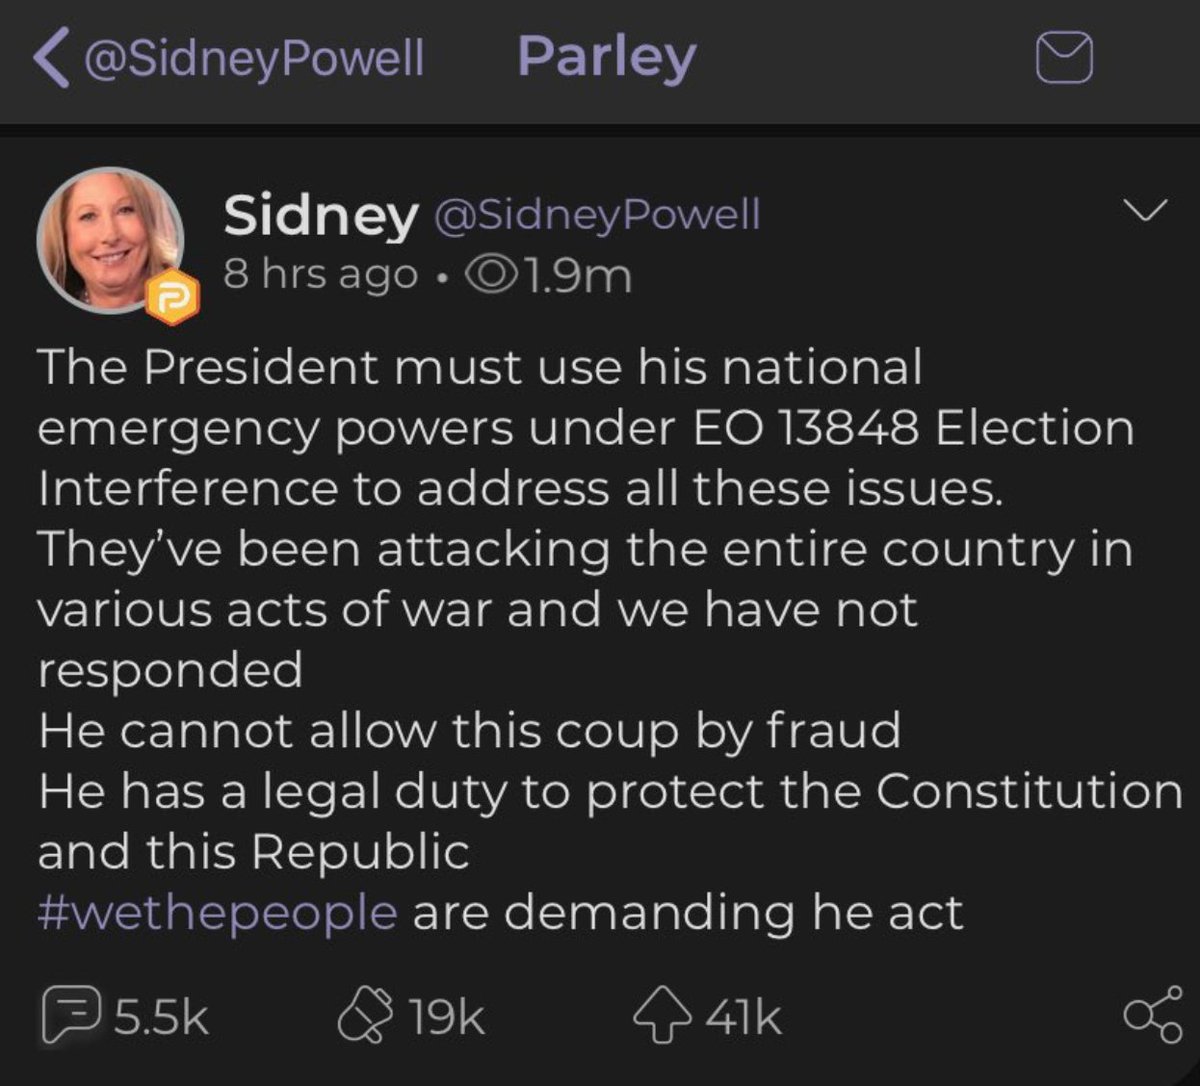 Real Sidney Powell provider of fake news complains about fake Sidney Powell selling real gold coins.